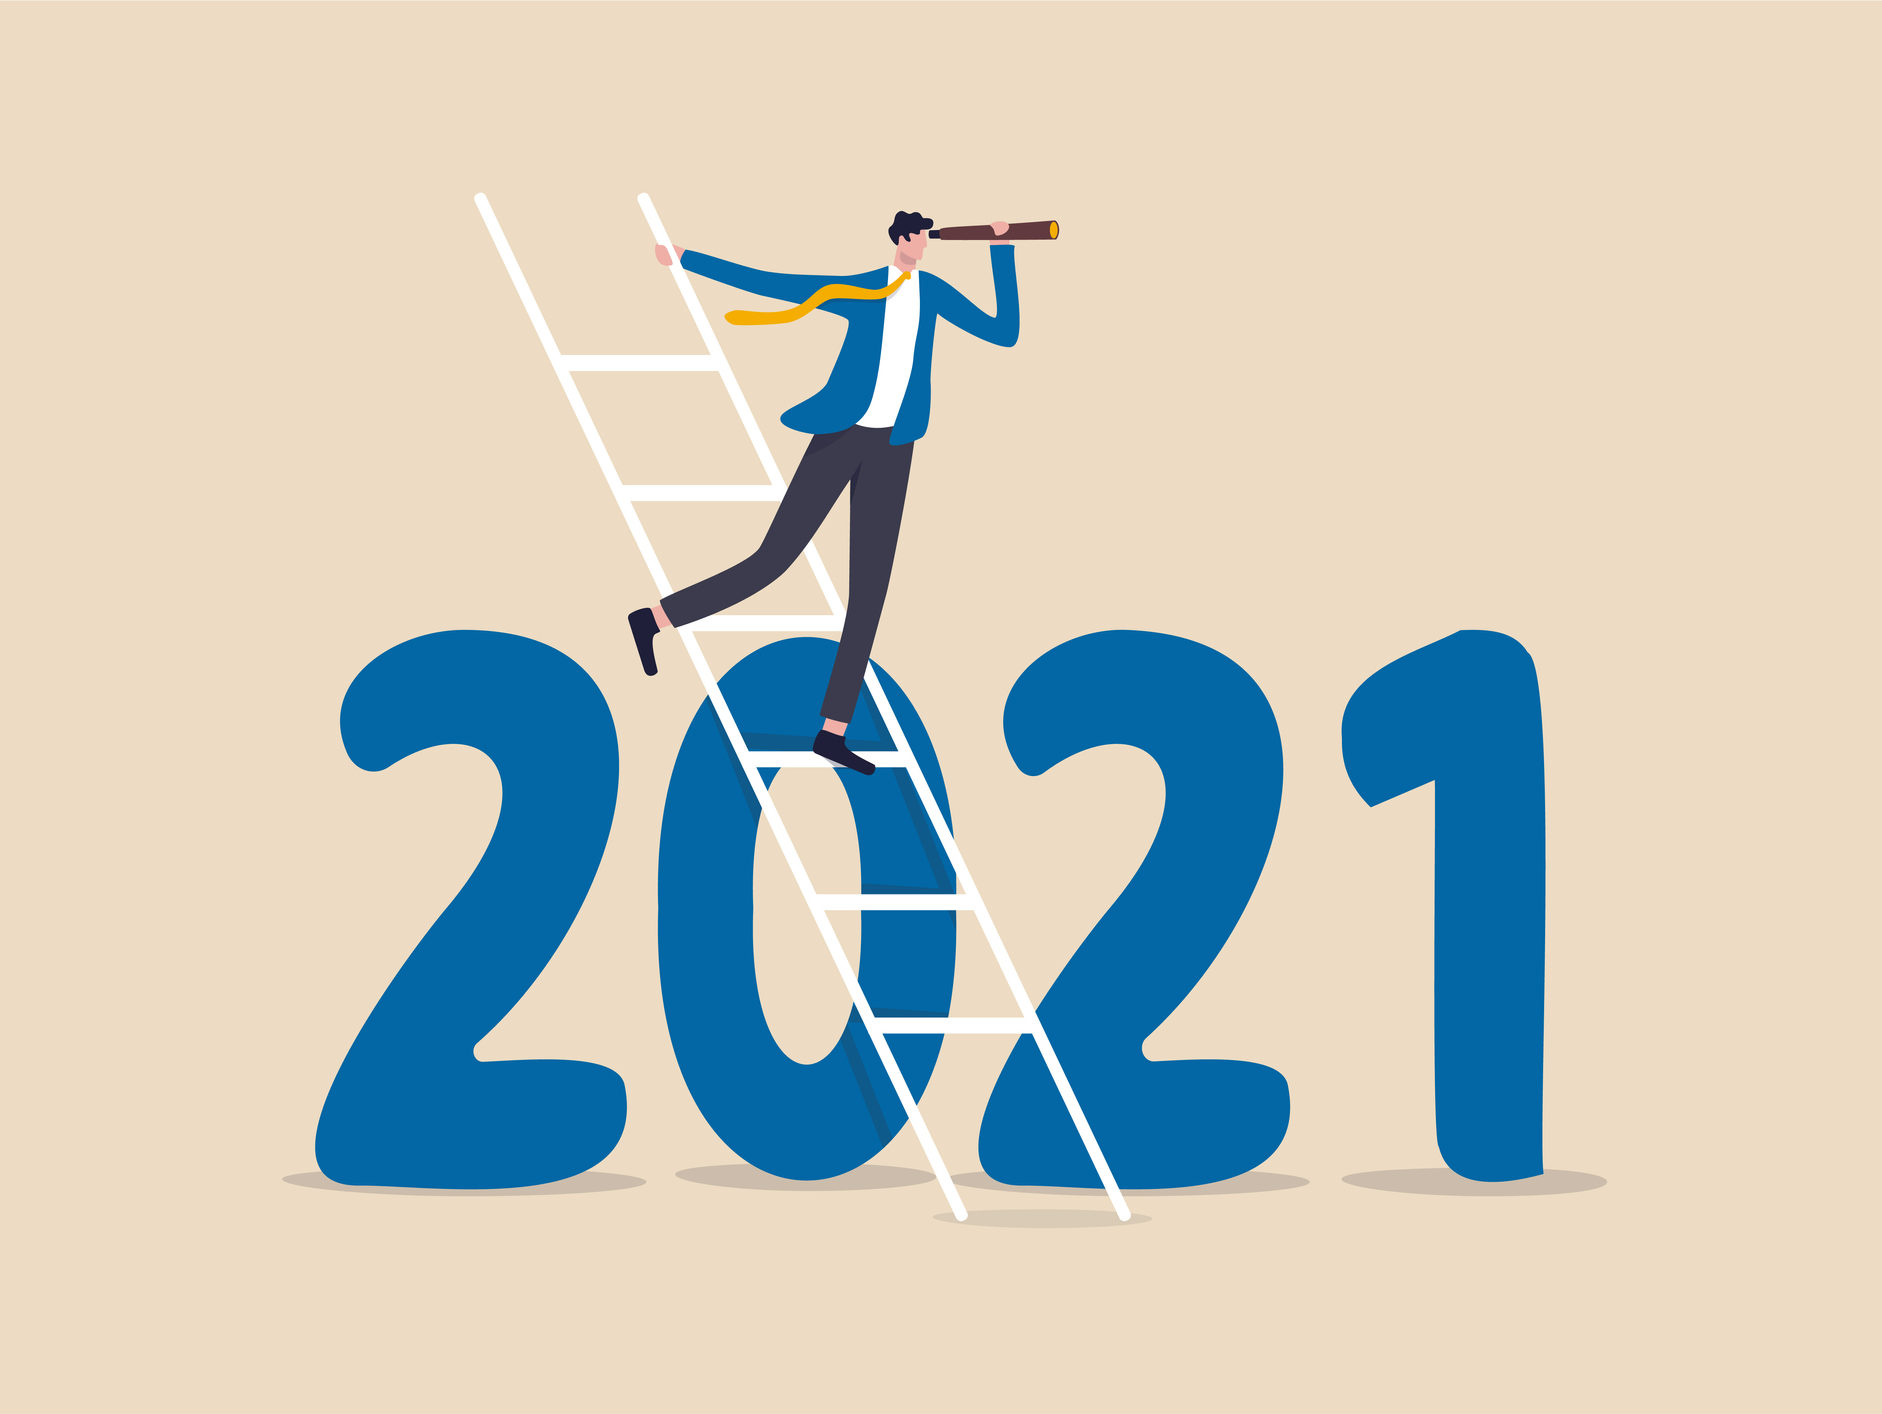 20 Issues to Watch in 2021